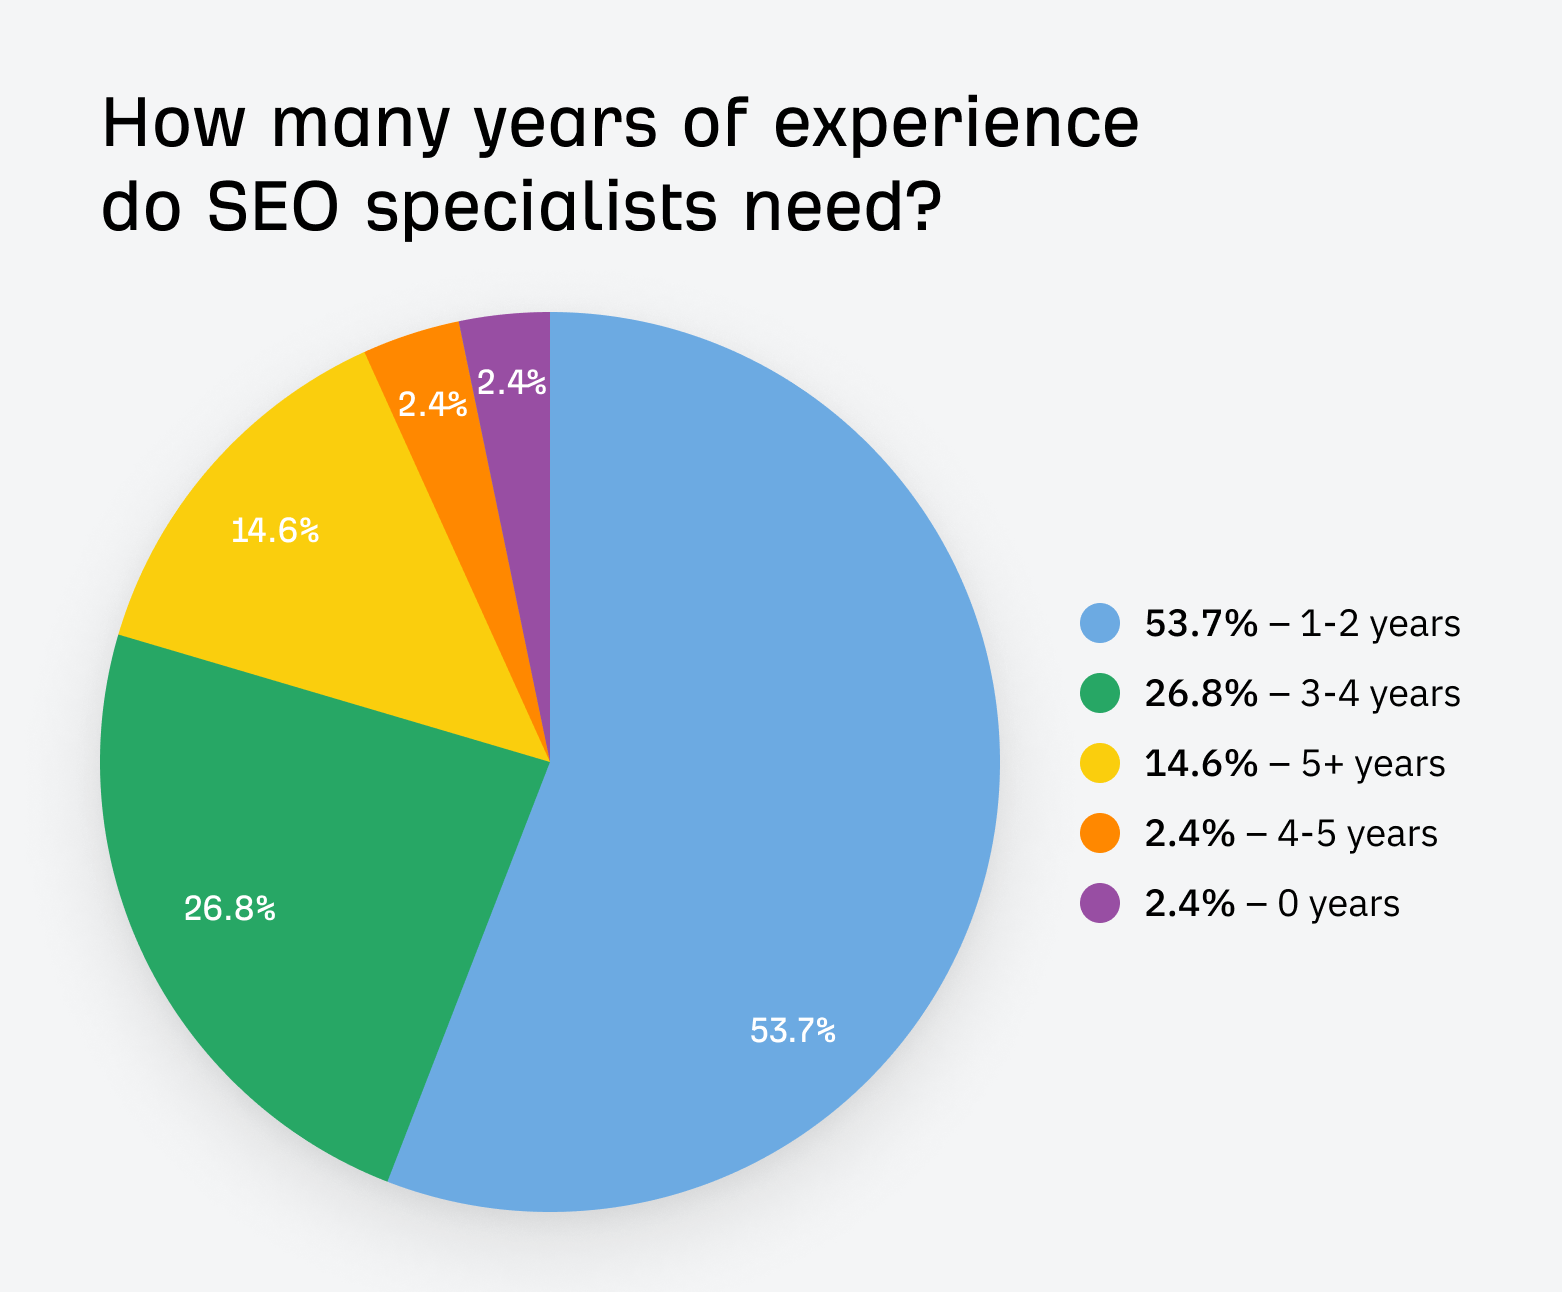 chart-showing-how-many-years-of-experience-seo-spe I Analyzed 52 SEO Specialist Job Listings. Here’s What They Do and How You Can Become One